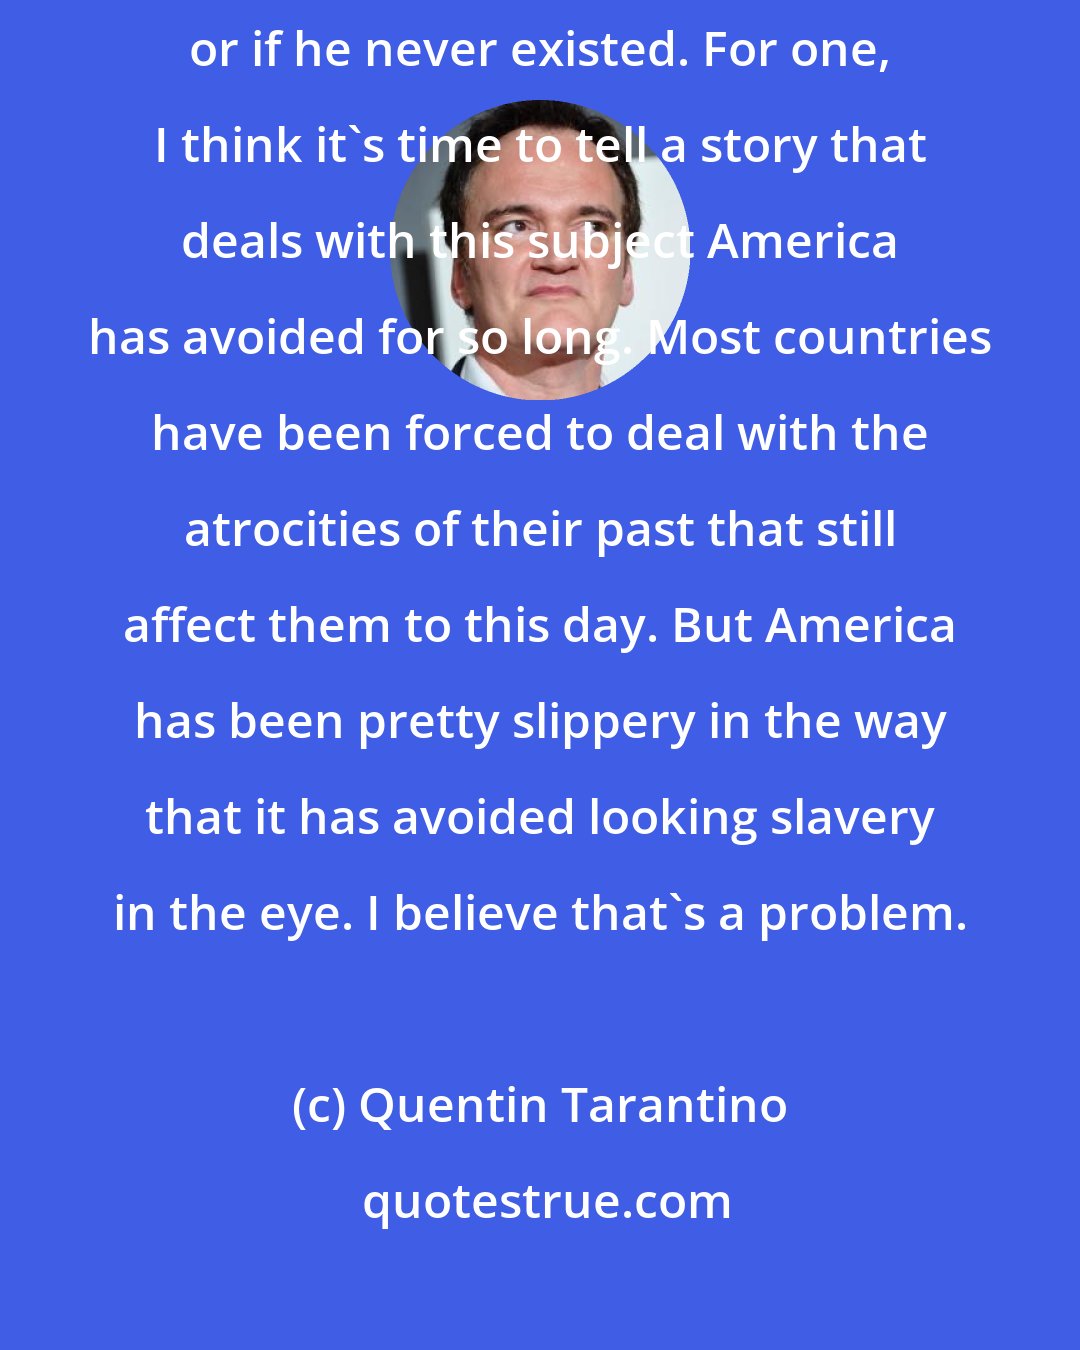 Quentin Tarantino: I would've written this story [Django] if [Barack] Obama were president or if he never existed. For one, I think it's time to tell a story that deals with this subject America has avoided for so long. Most countries have been forced to deal with the atrocities of their past that still affect them to this day. But America has been pretty slippery in the way that it has avoided looking slavery in the eye. I believe that's a problem.